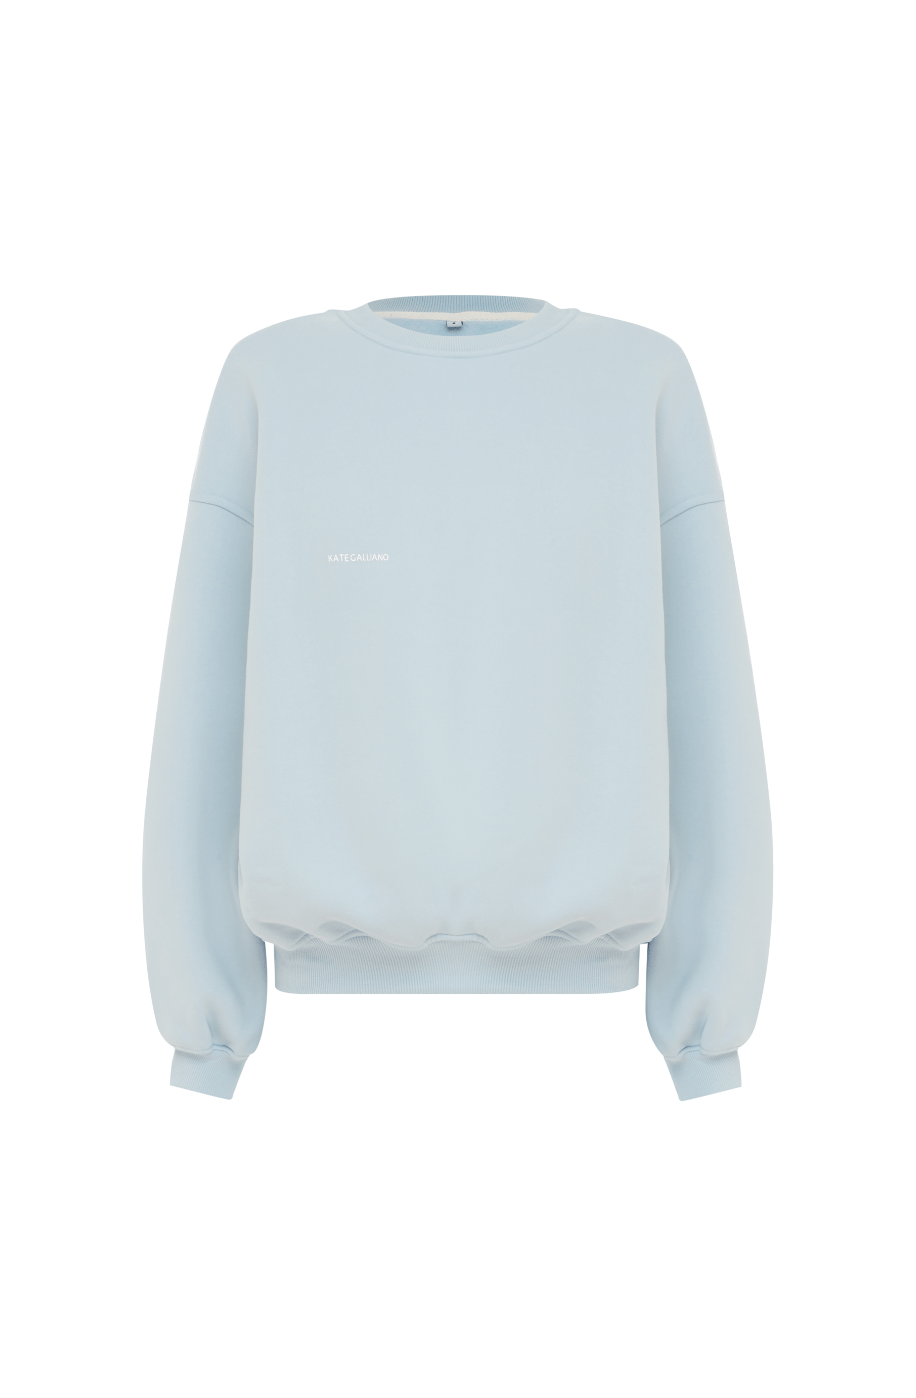 LUXE 23 Jumper - Baby Blue Be Activewear